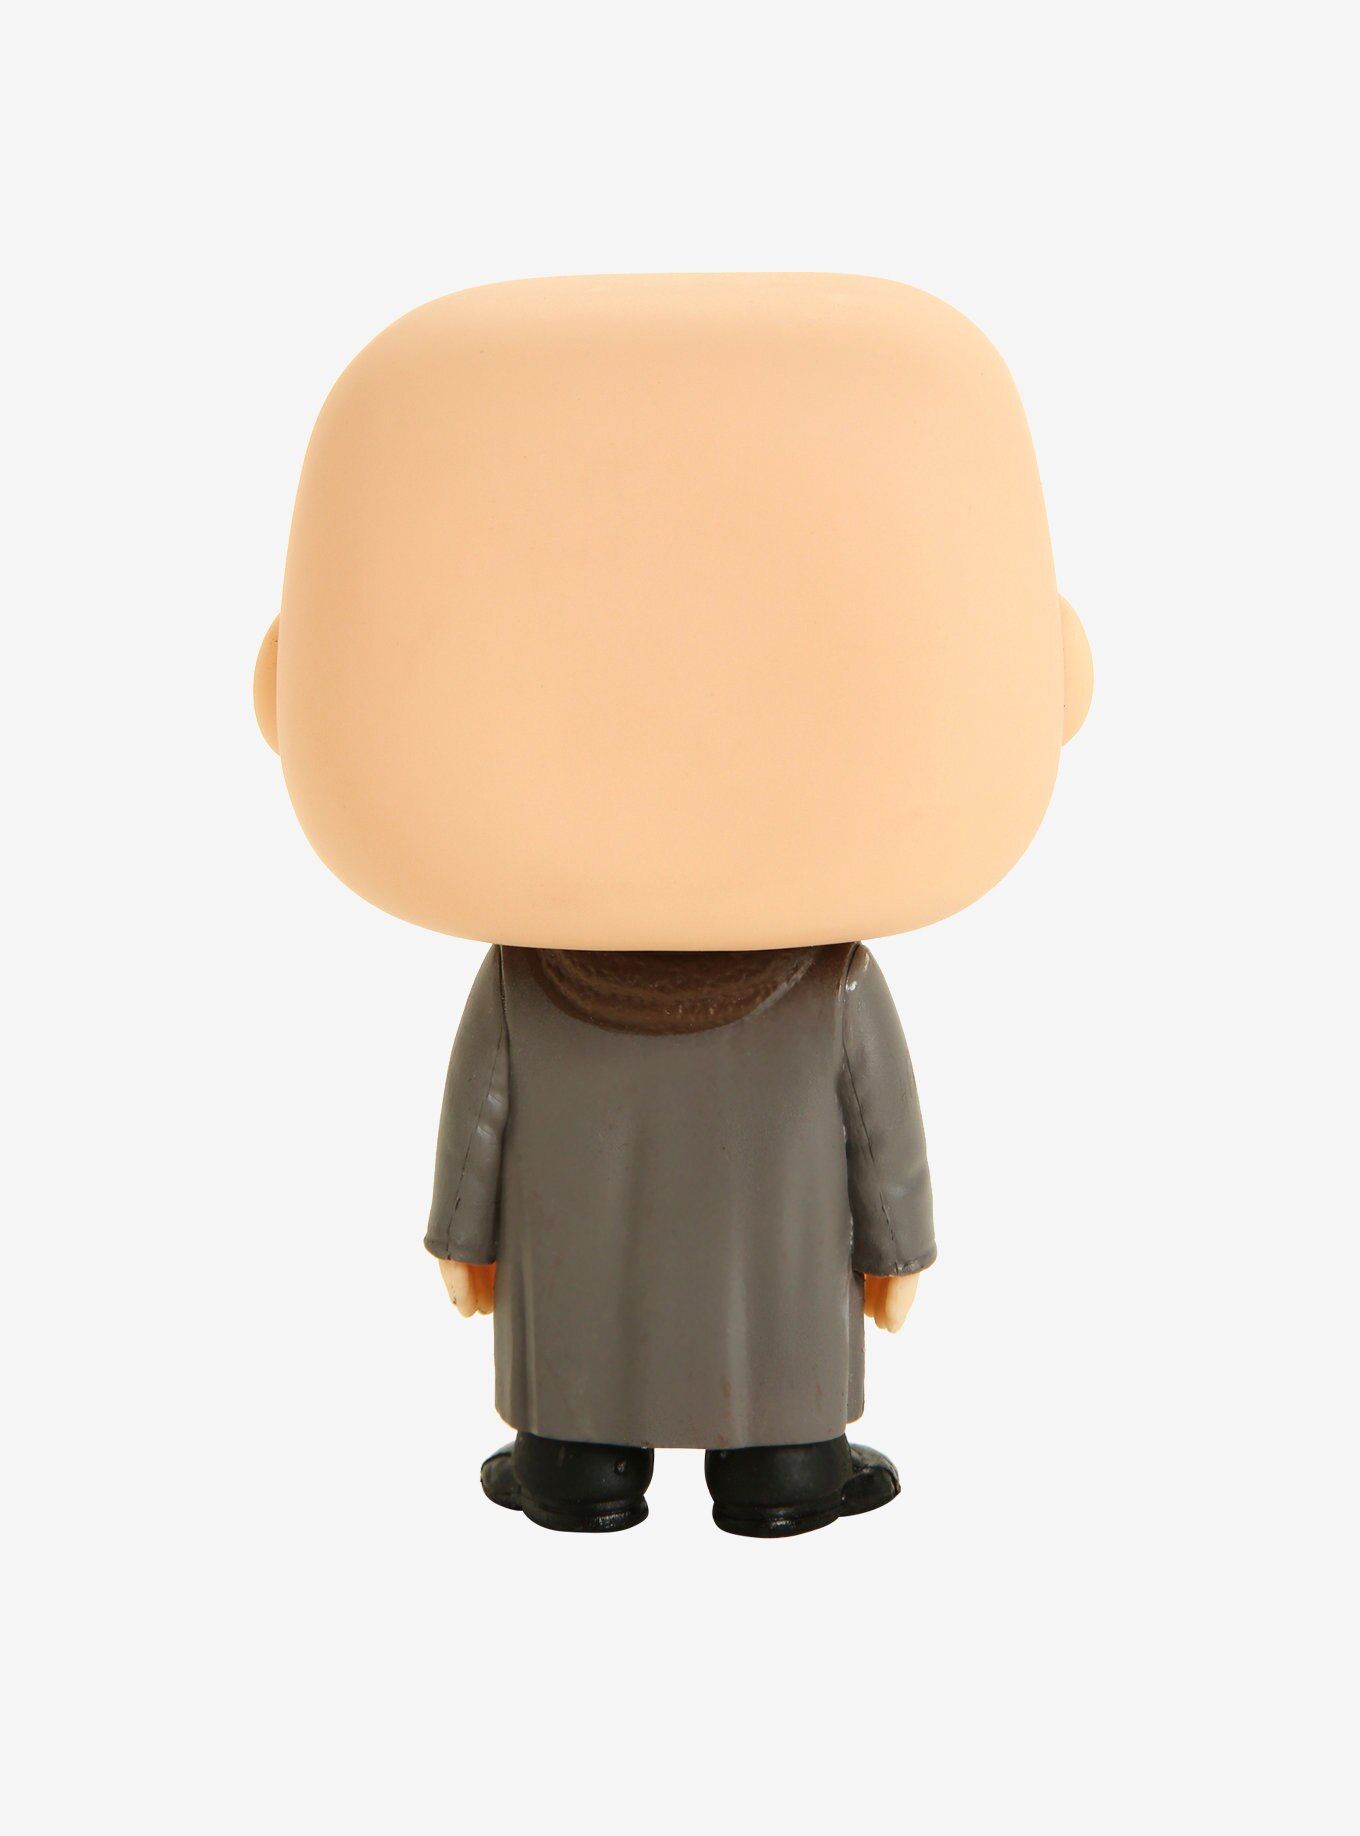 Uncle Fester #813 (Tio Chico) - The Addams Family (A Família Addams) - Funko Pop! Television